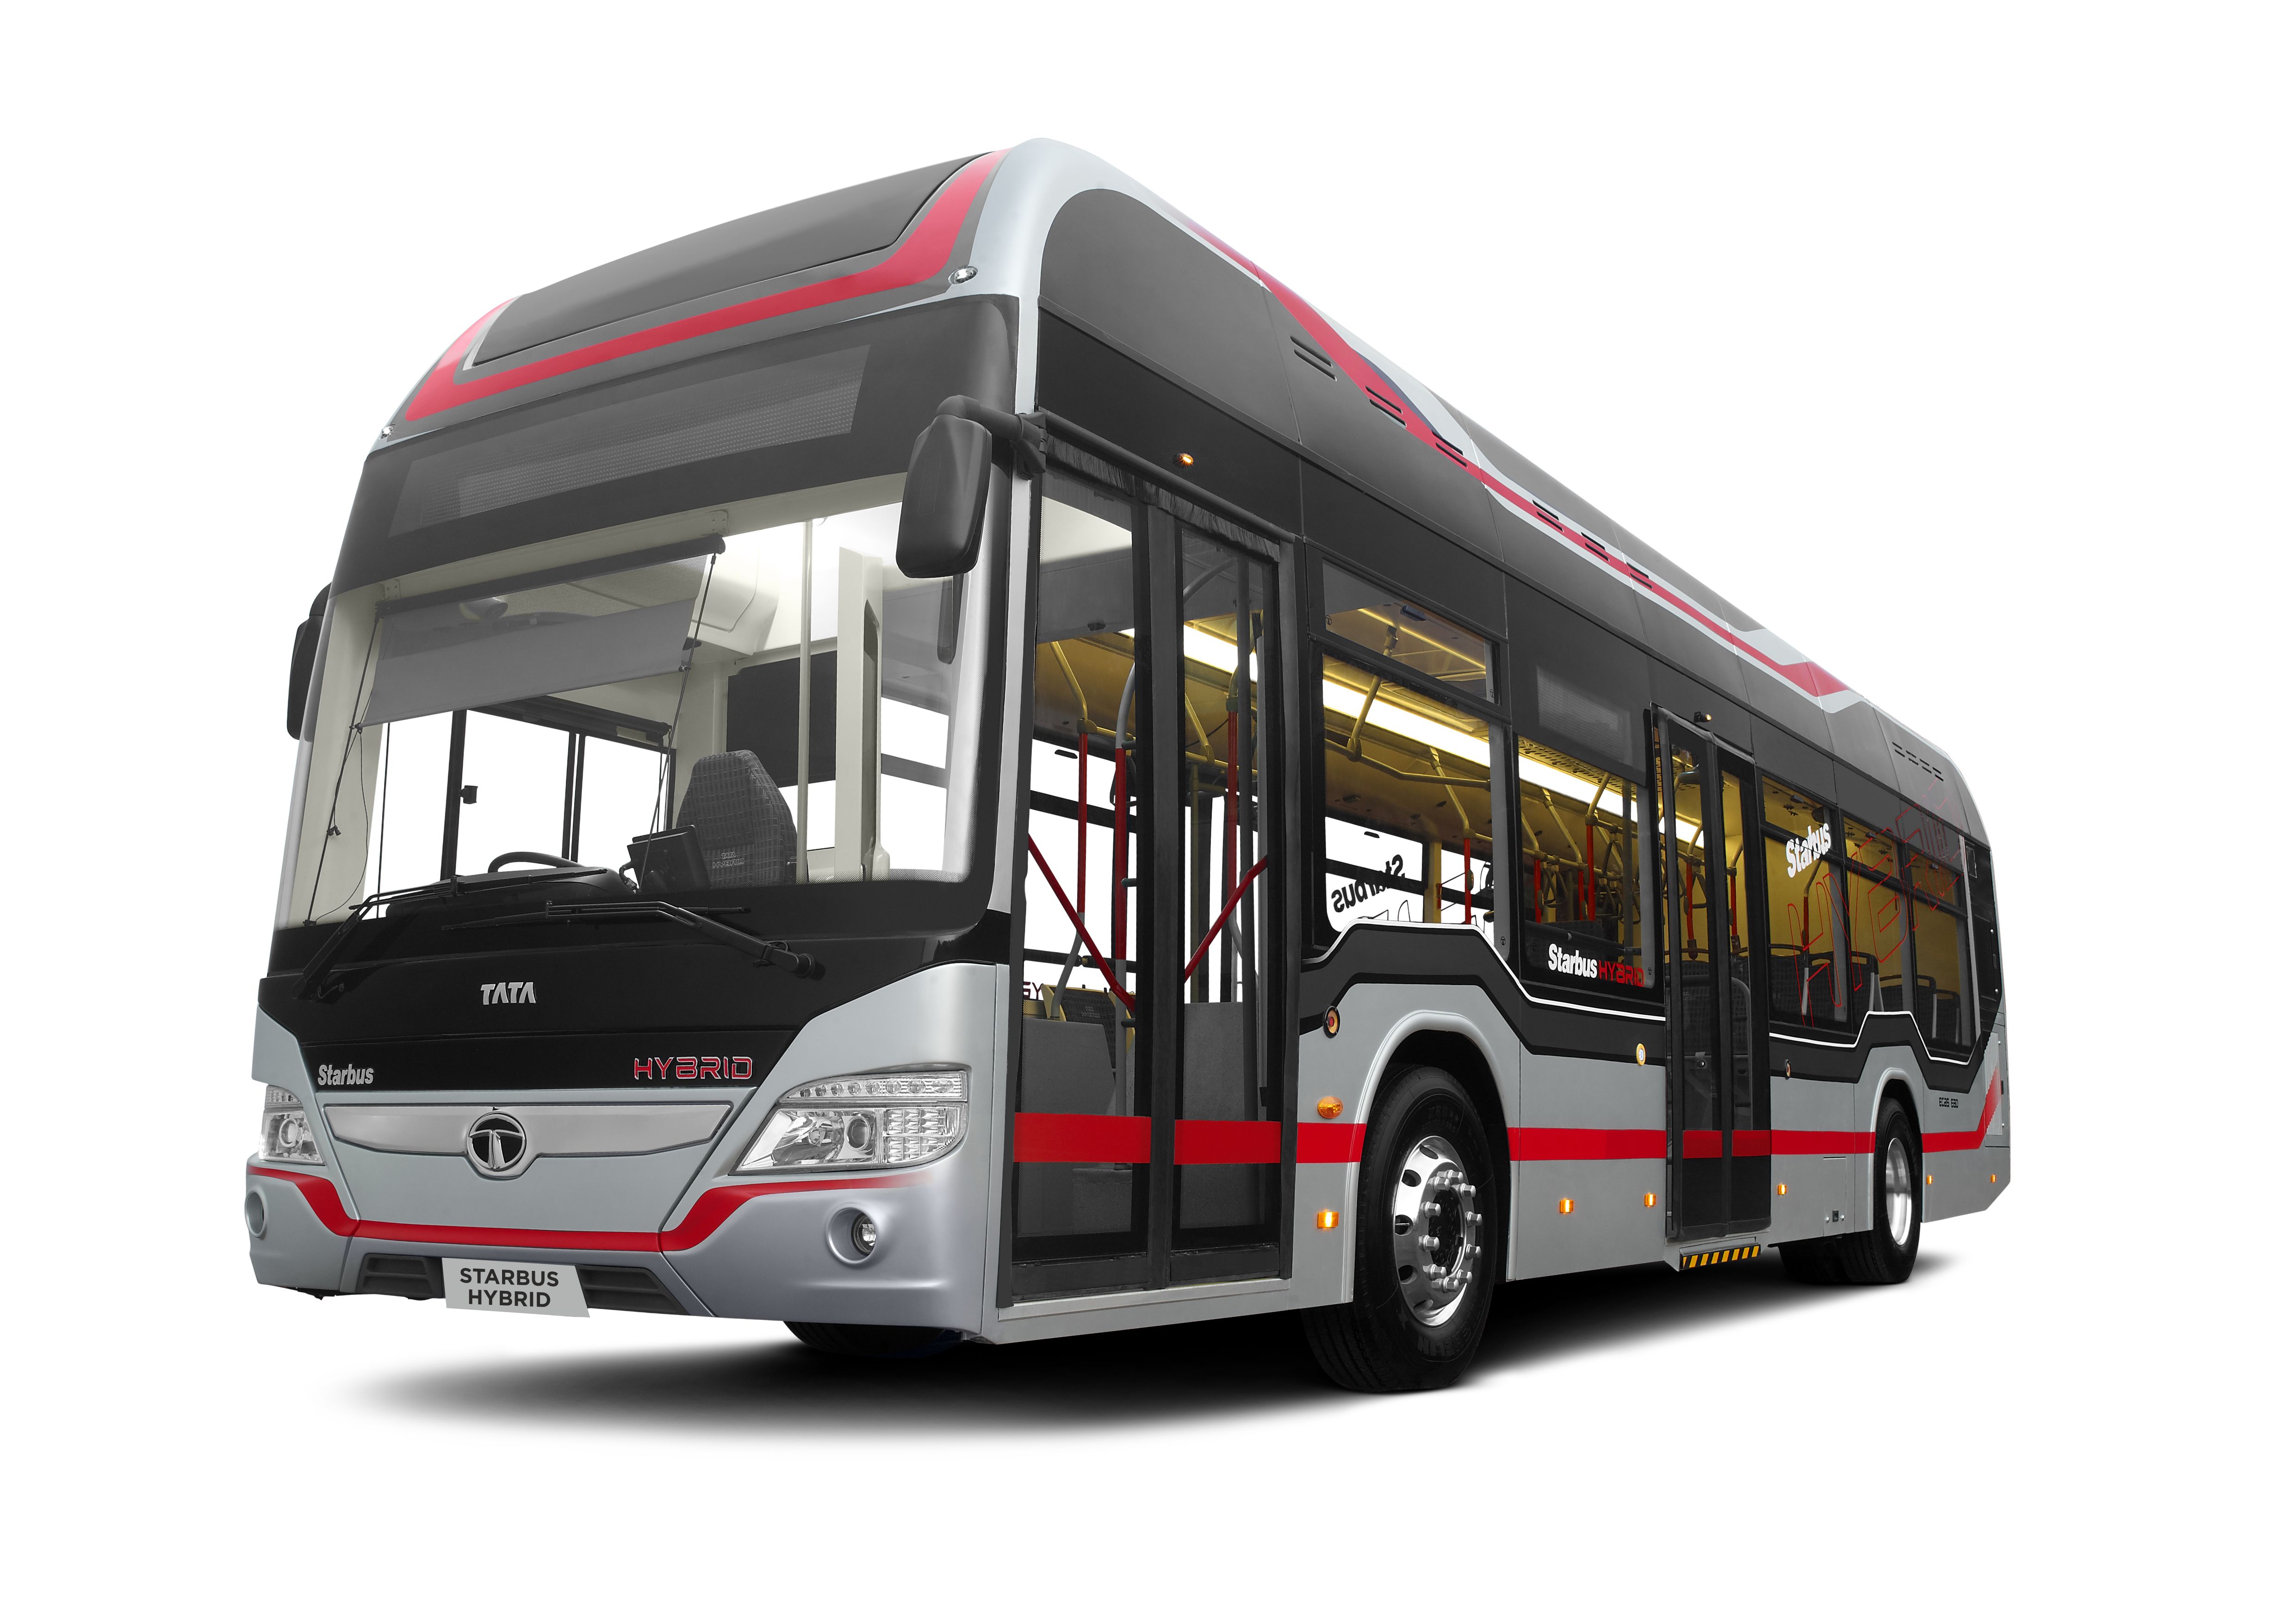 Tata Motors launched Hybrid & Electric buses The future of Mass Public